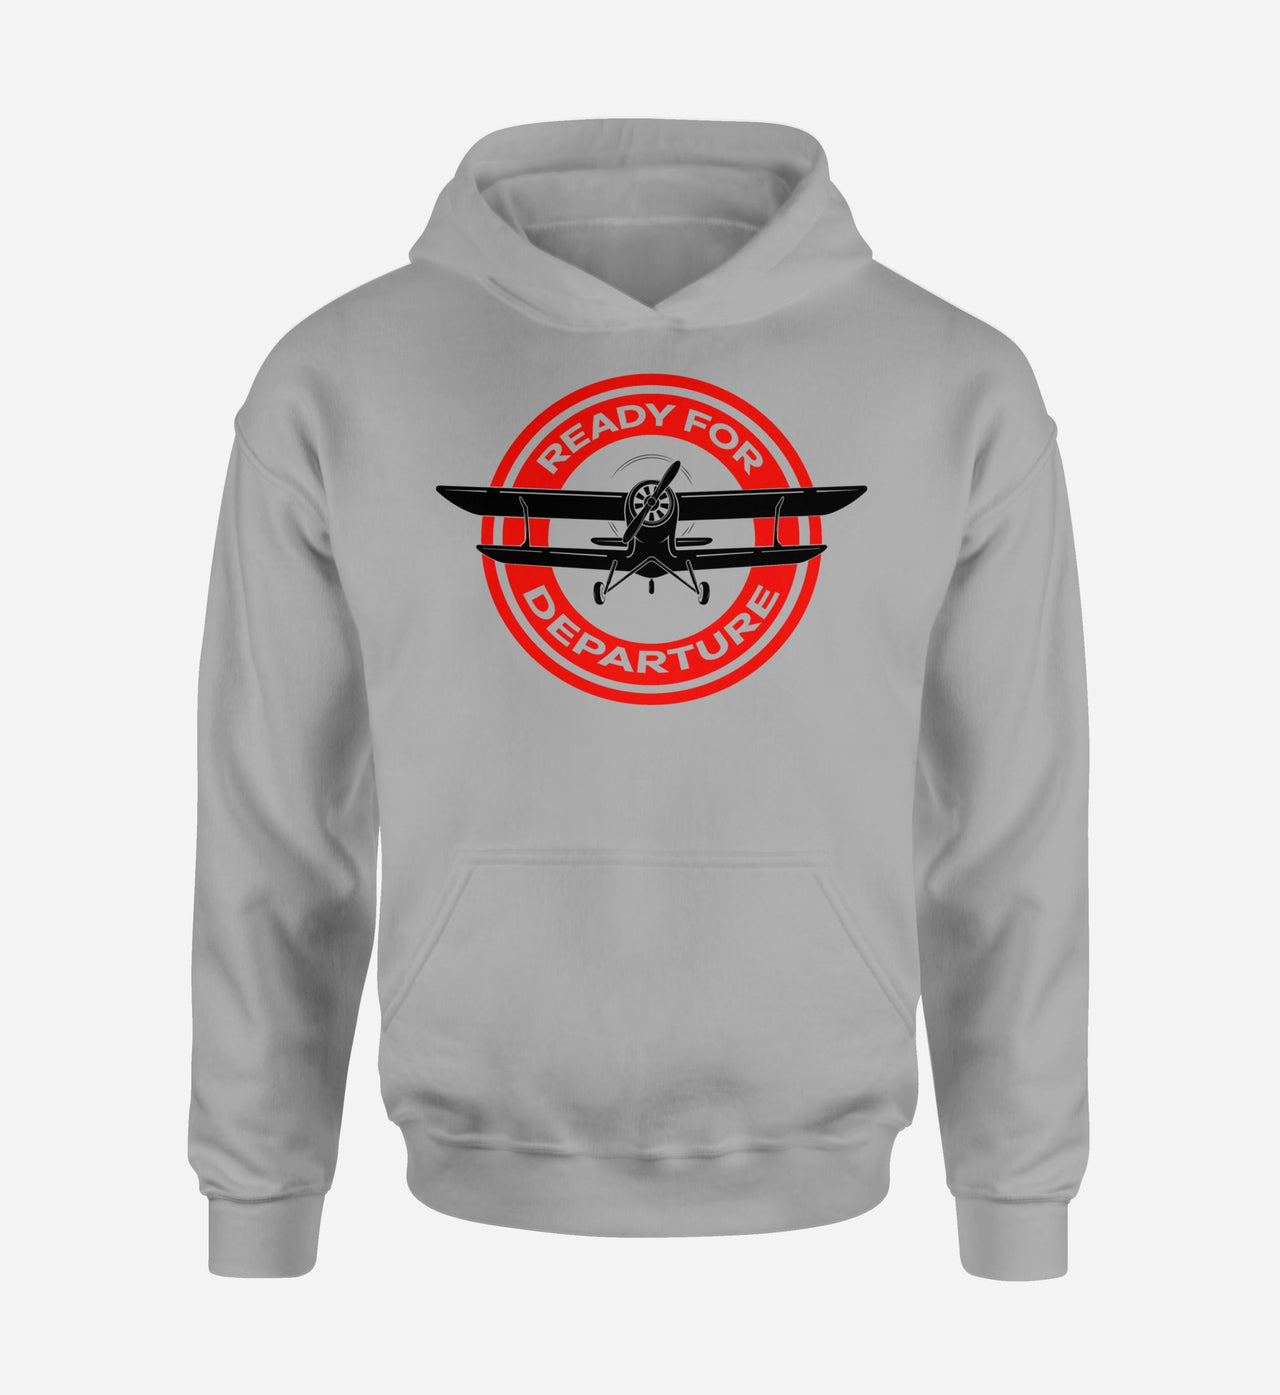 Ready for Departure Designed Hoodies